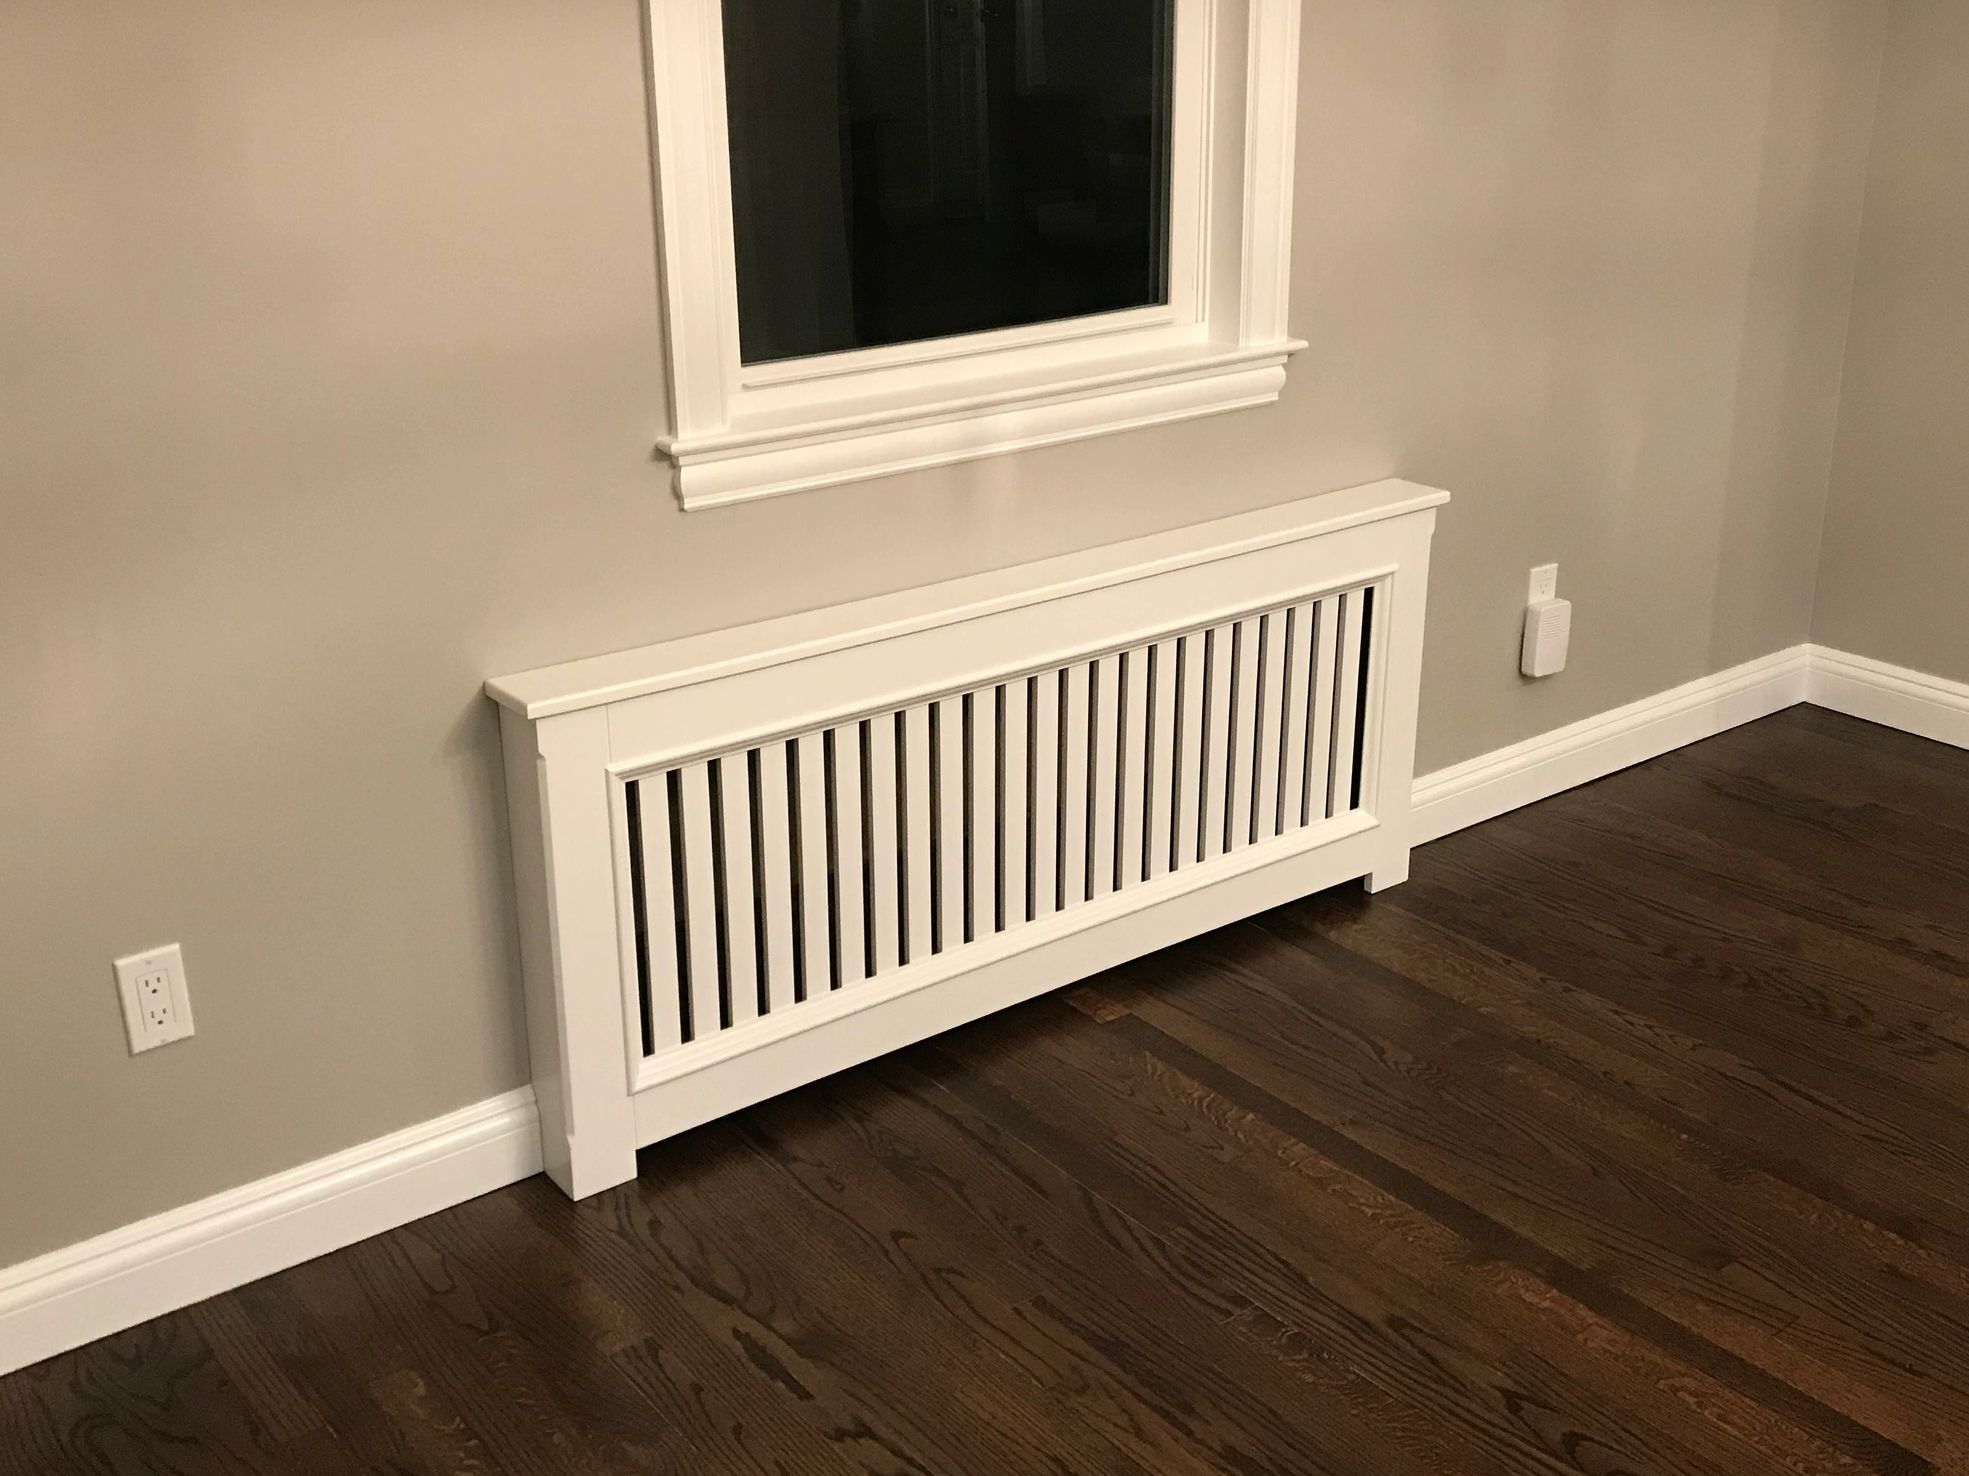 Radiator Cover With Molding